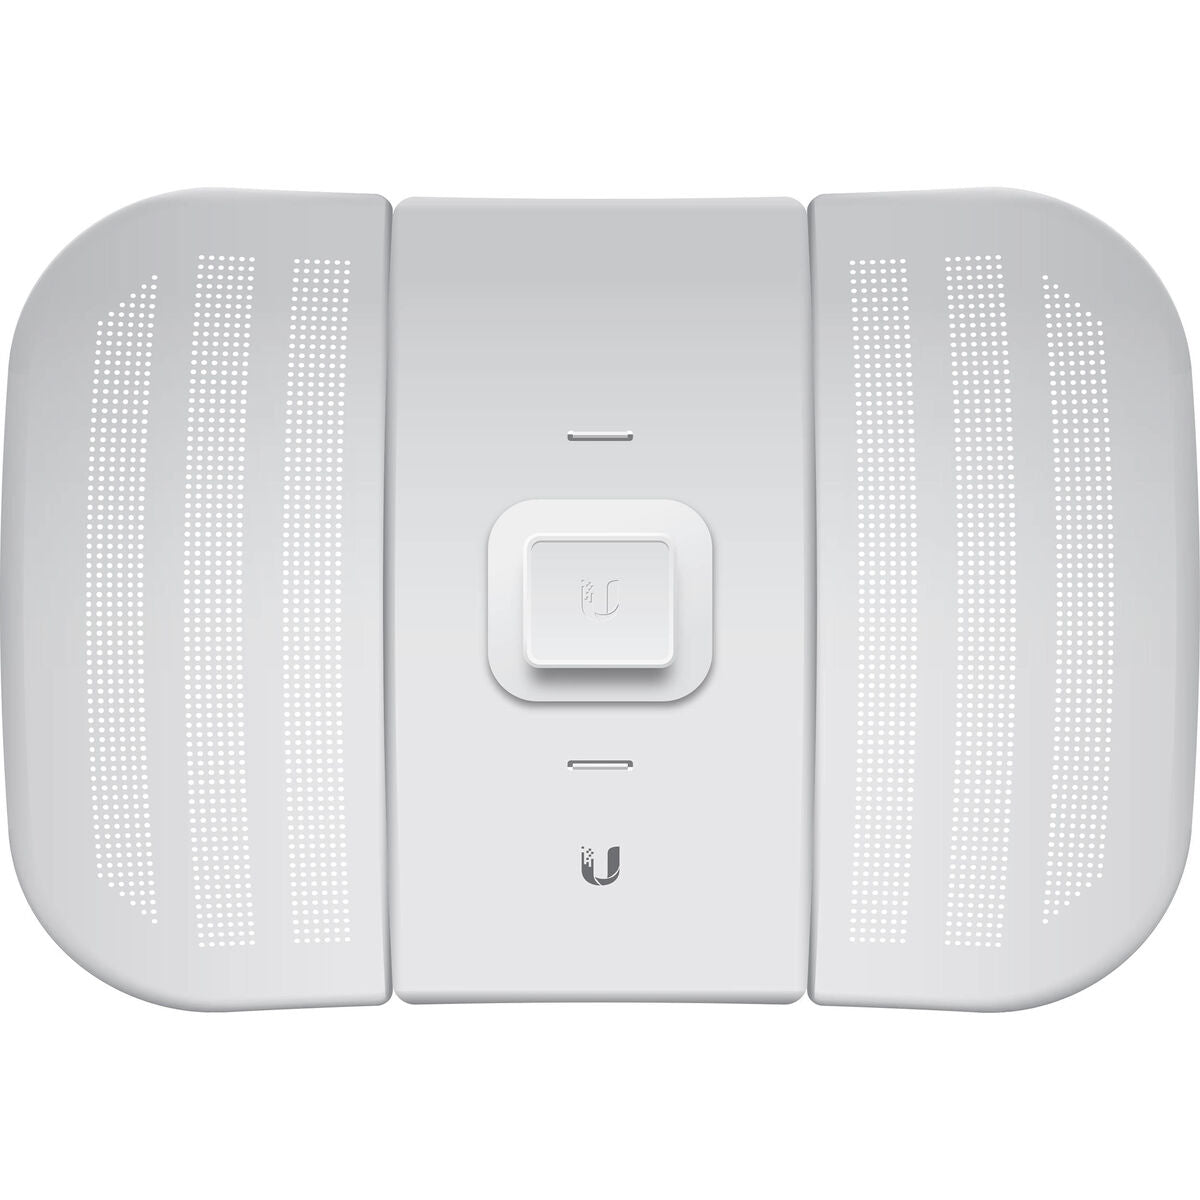 Access point UBIQUITI LBE-M5-23 100 Mbps, UBIQUITI, Computing, Network devices, access-point-ubiquiti-lbe-m5-23-100-mbps, Brand_UBIQUITI, category-reference-2609, category-reference-2803, category-reference-2820, category-reference-t-19685, category-reference-t-19914, category-reference-t-21370, Condition_NEW, ferretería, networks/wiring, Price_50 - 100, Teleworking, RiotNook